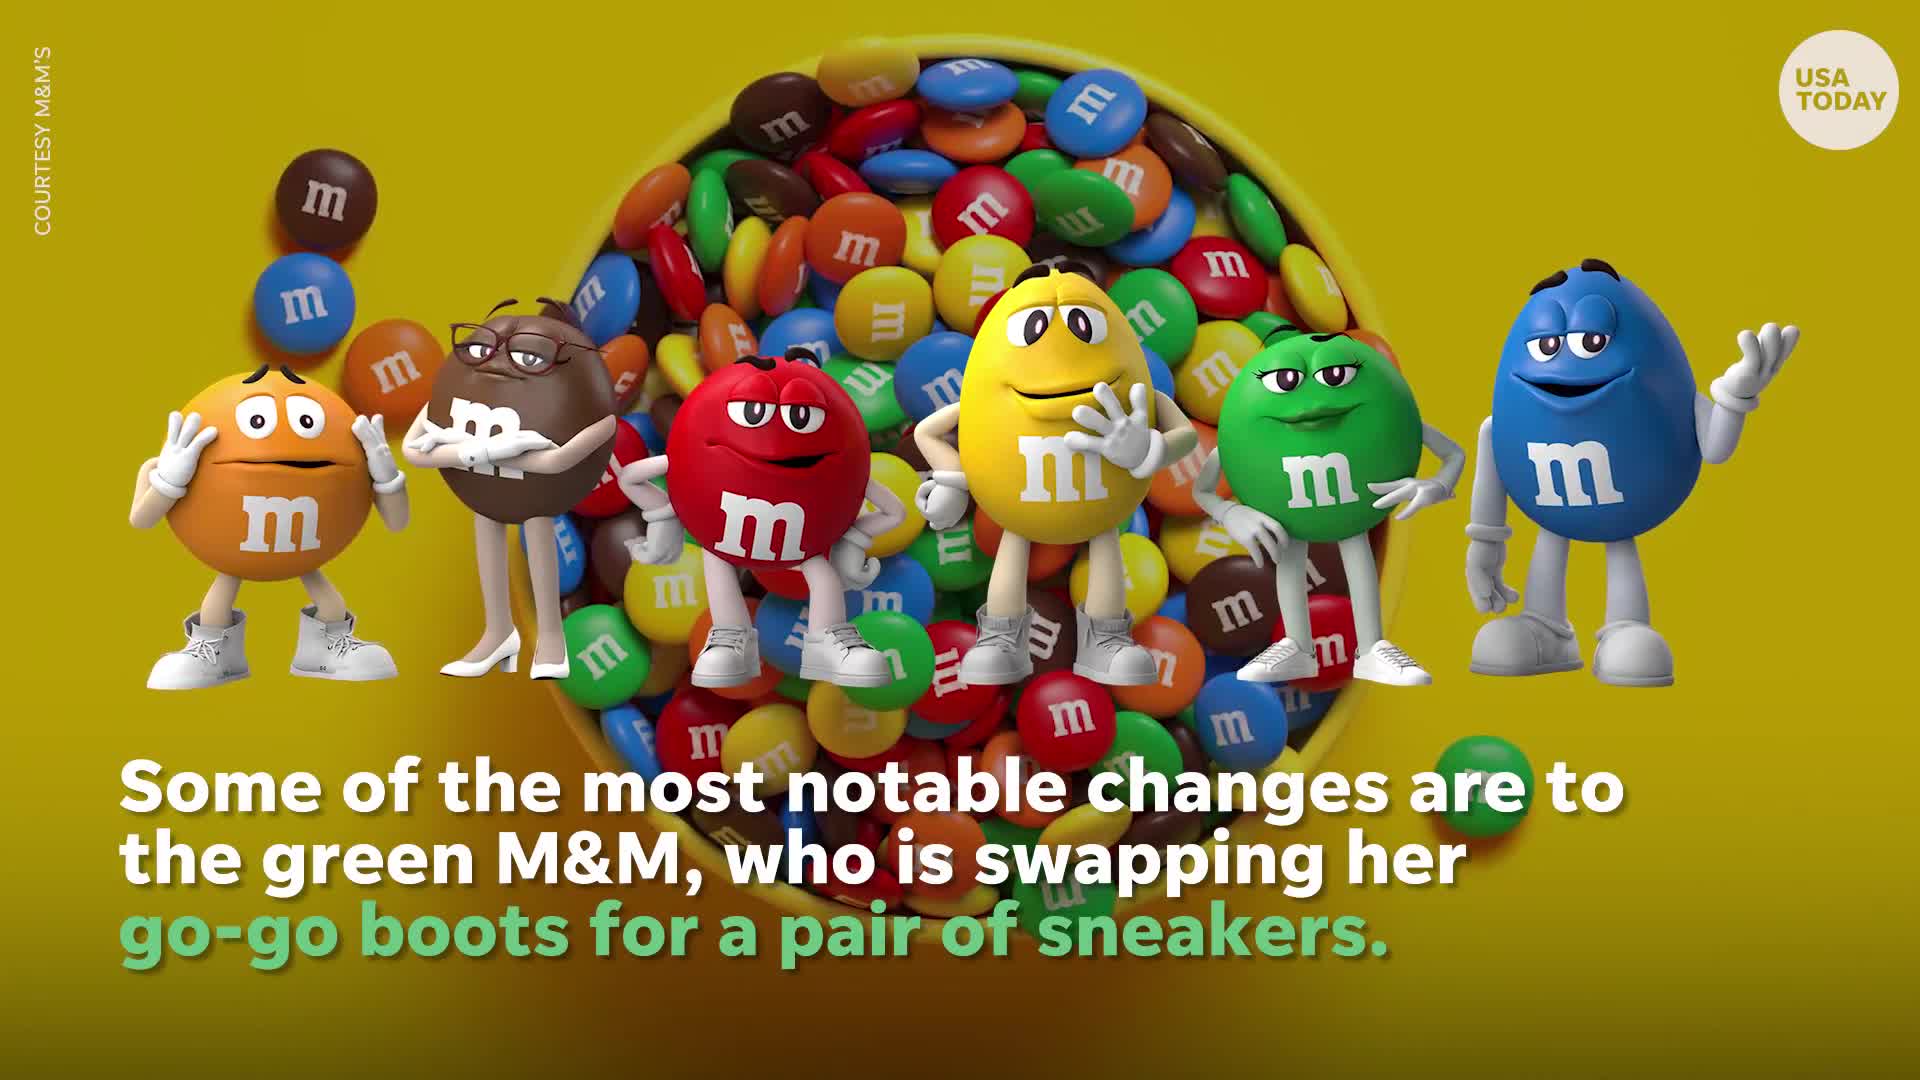 Meet Purple M&M, the Candy Brand's First New Character in a Decade